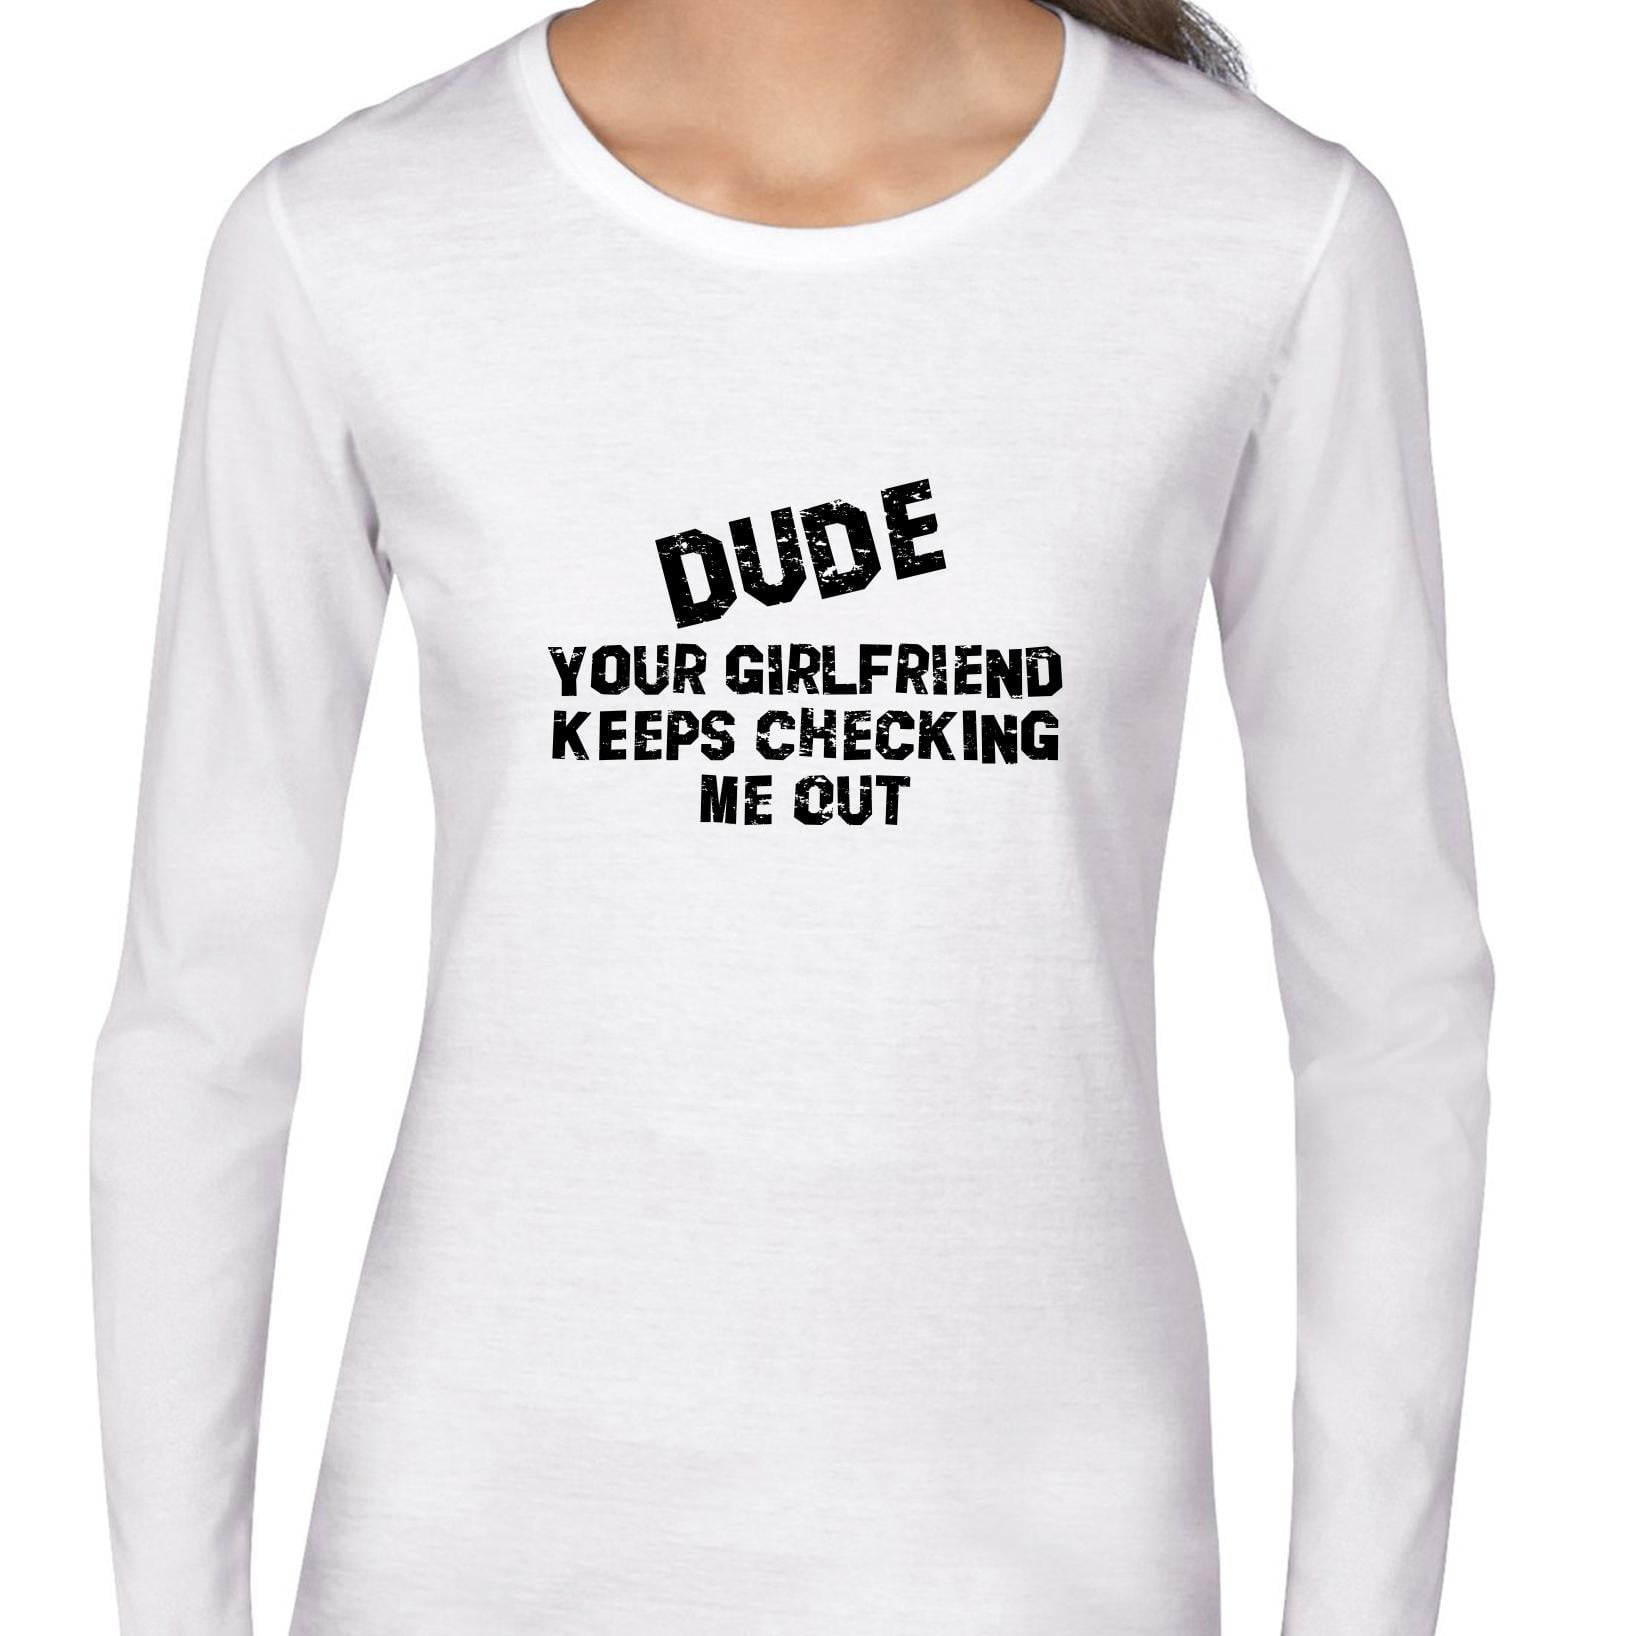 Onset Saucer Slumber Dude! Your Girlfriend Keeps Checking Me Out - Funny Women's Long Sleeve  Grey T-Shirt - Walmart.com